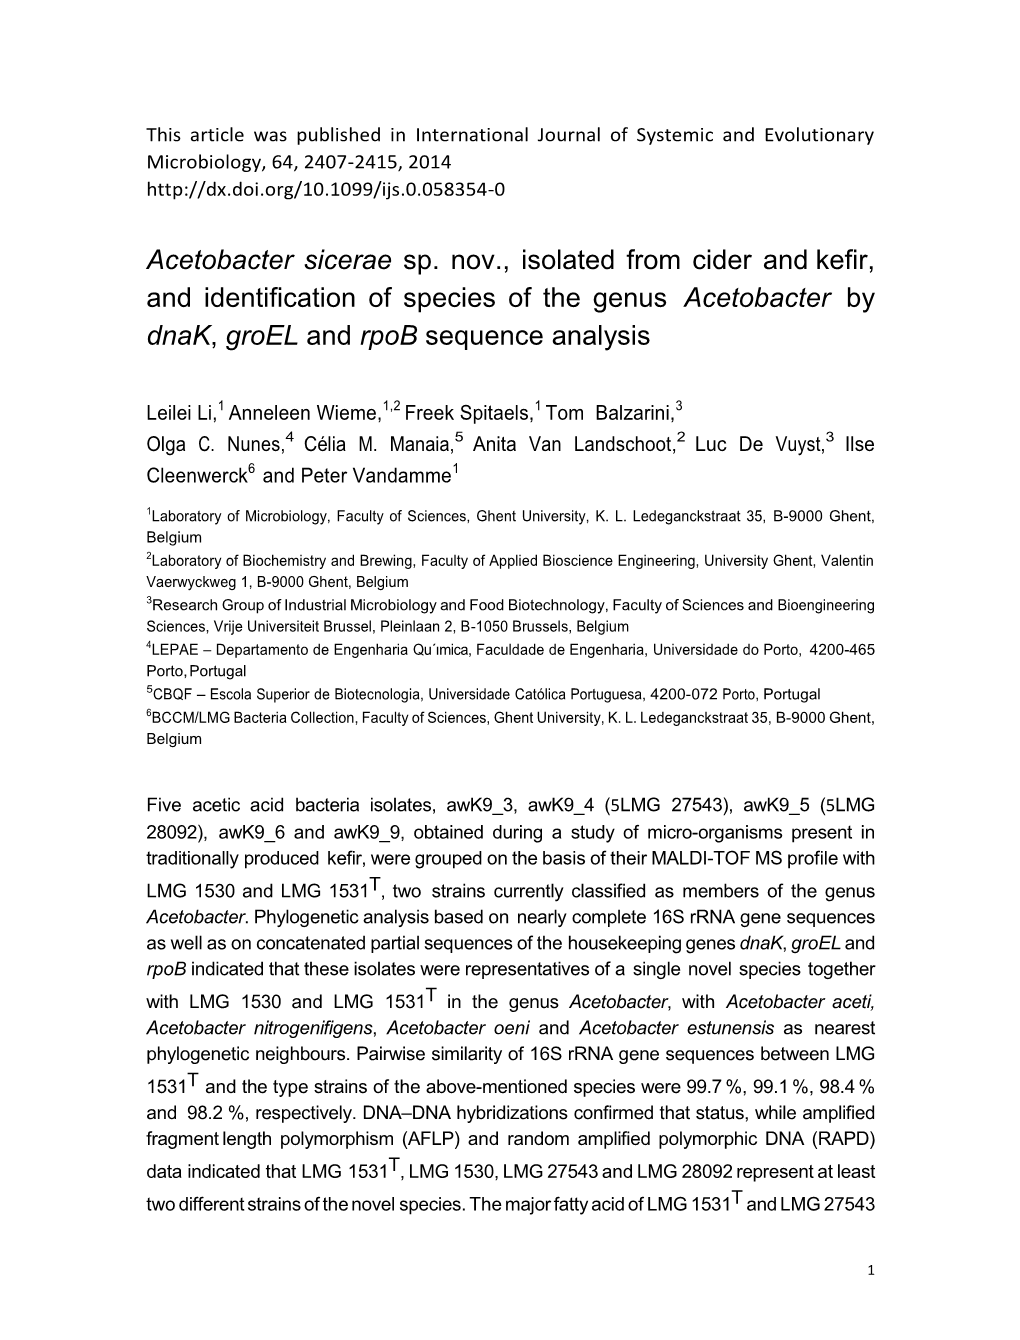 Acetobacter Sicerae Sp. Nov., Isolated from Cider and Kefir, and Identification of Species of the Genus Acetobacter by Dnak, Groel and Rpob Sequence Analysis